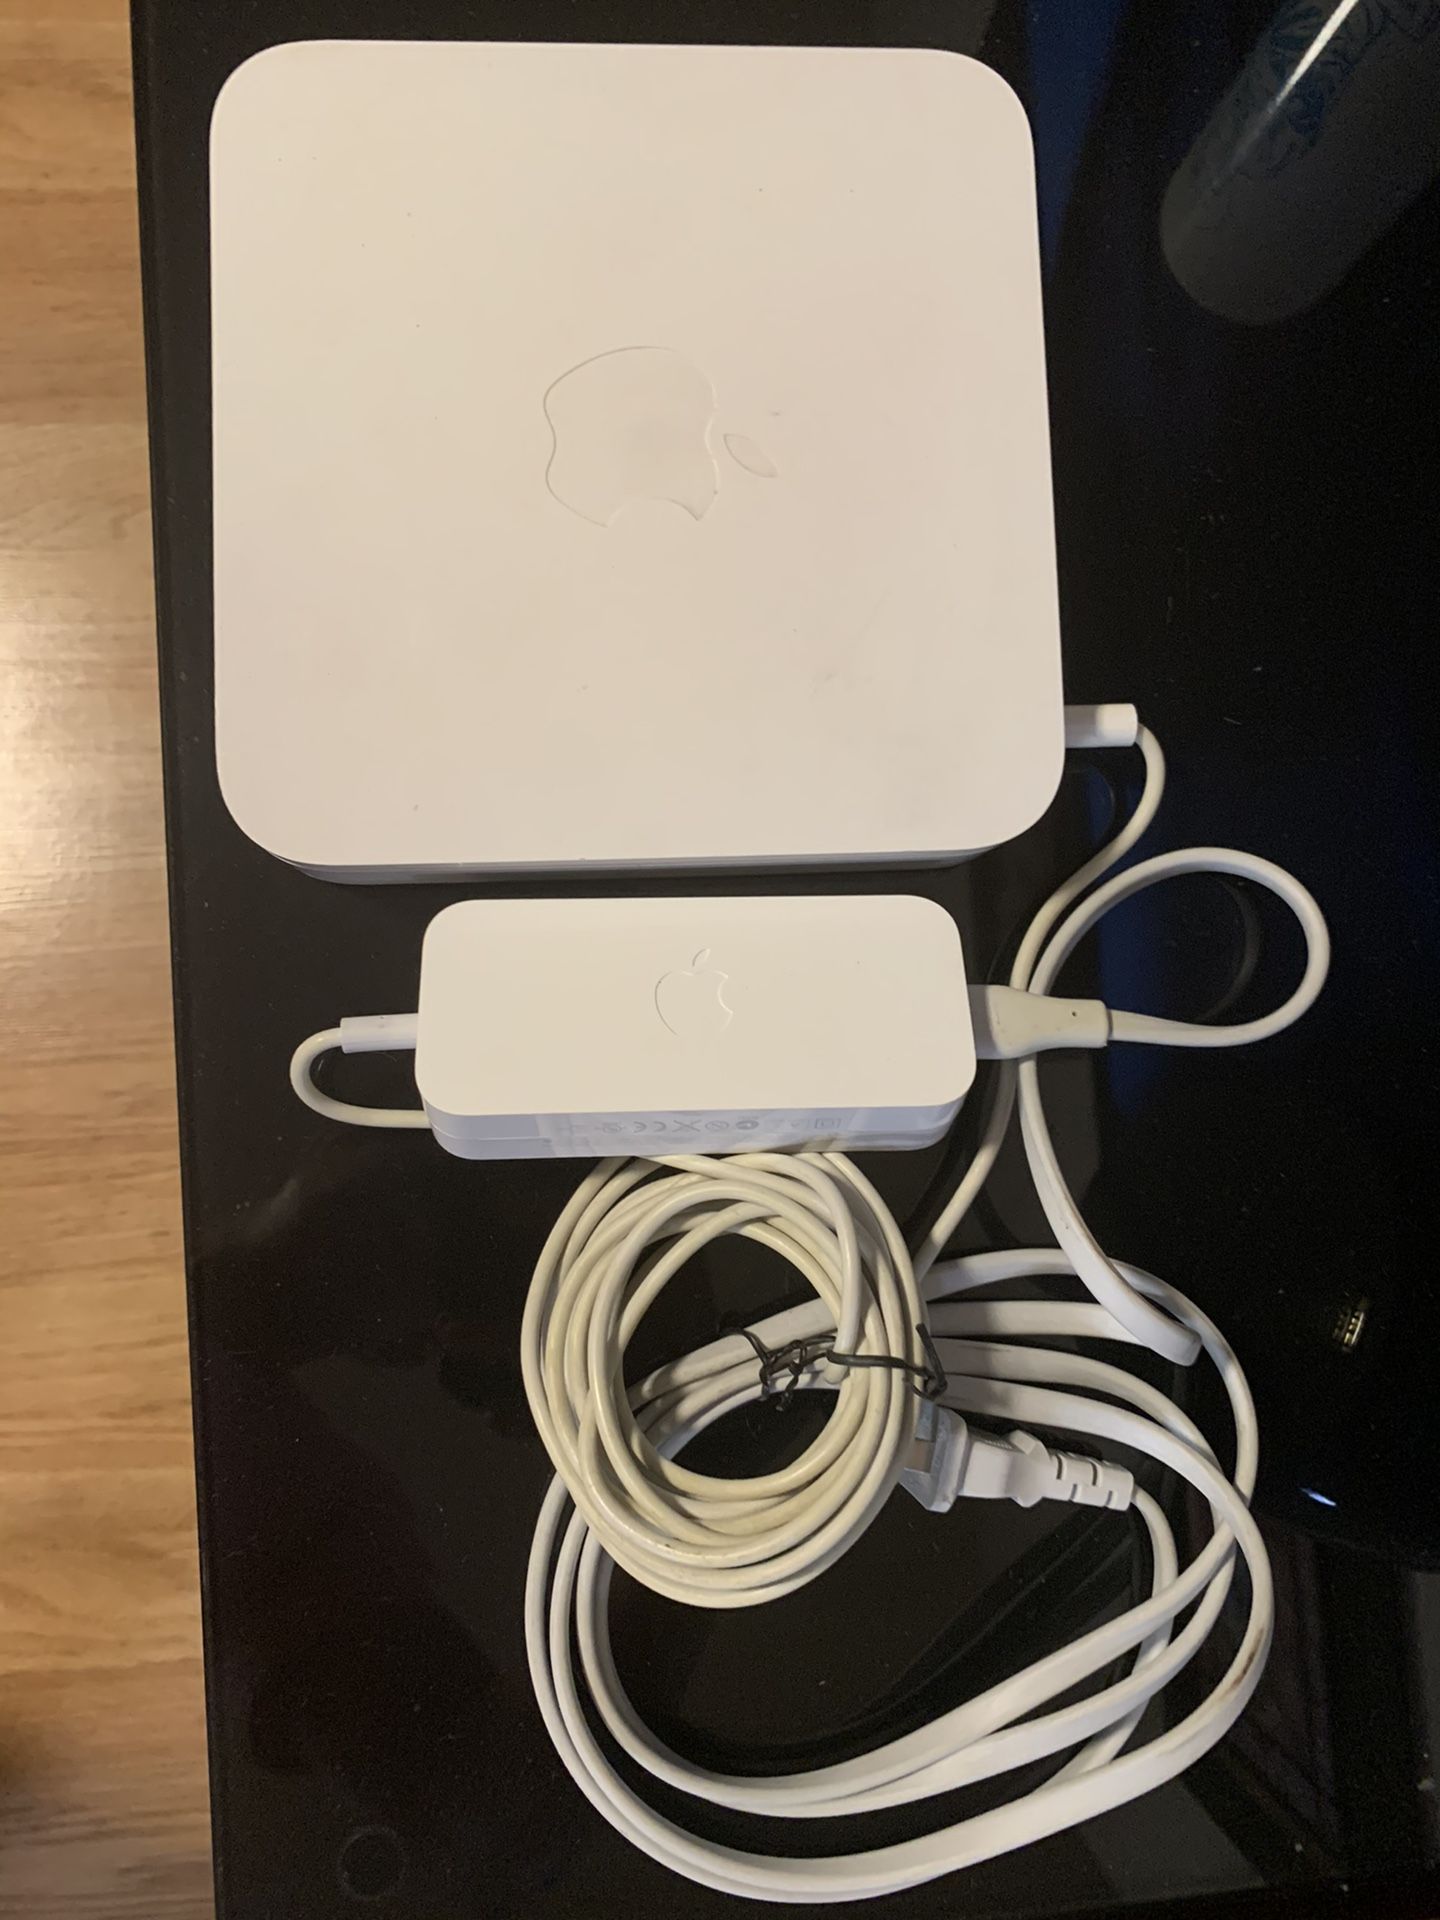 Apple Extreme Router